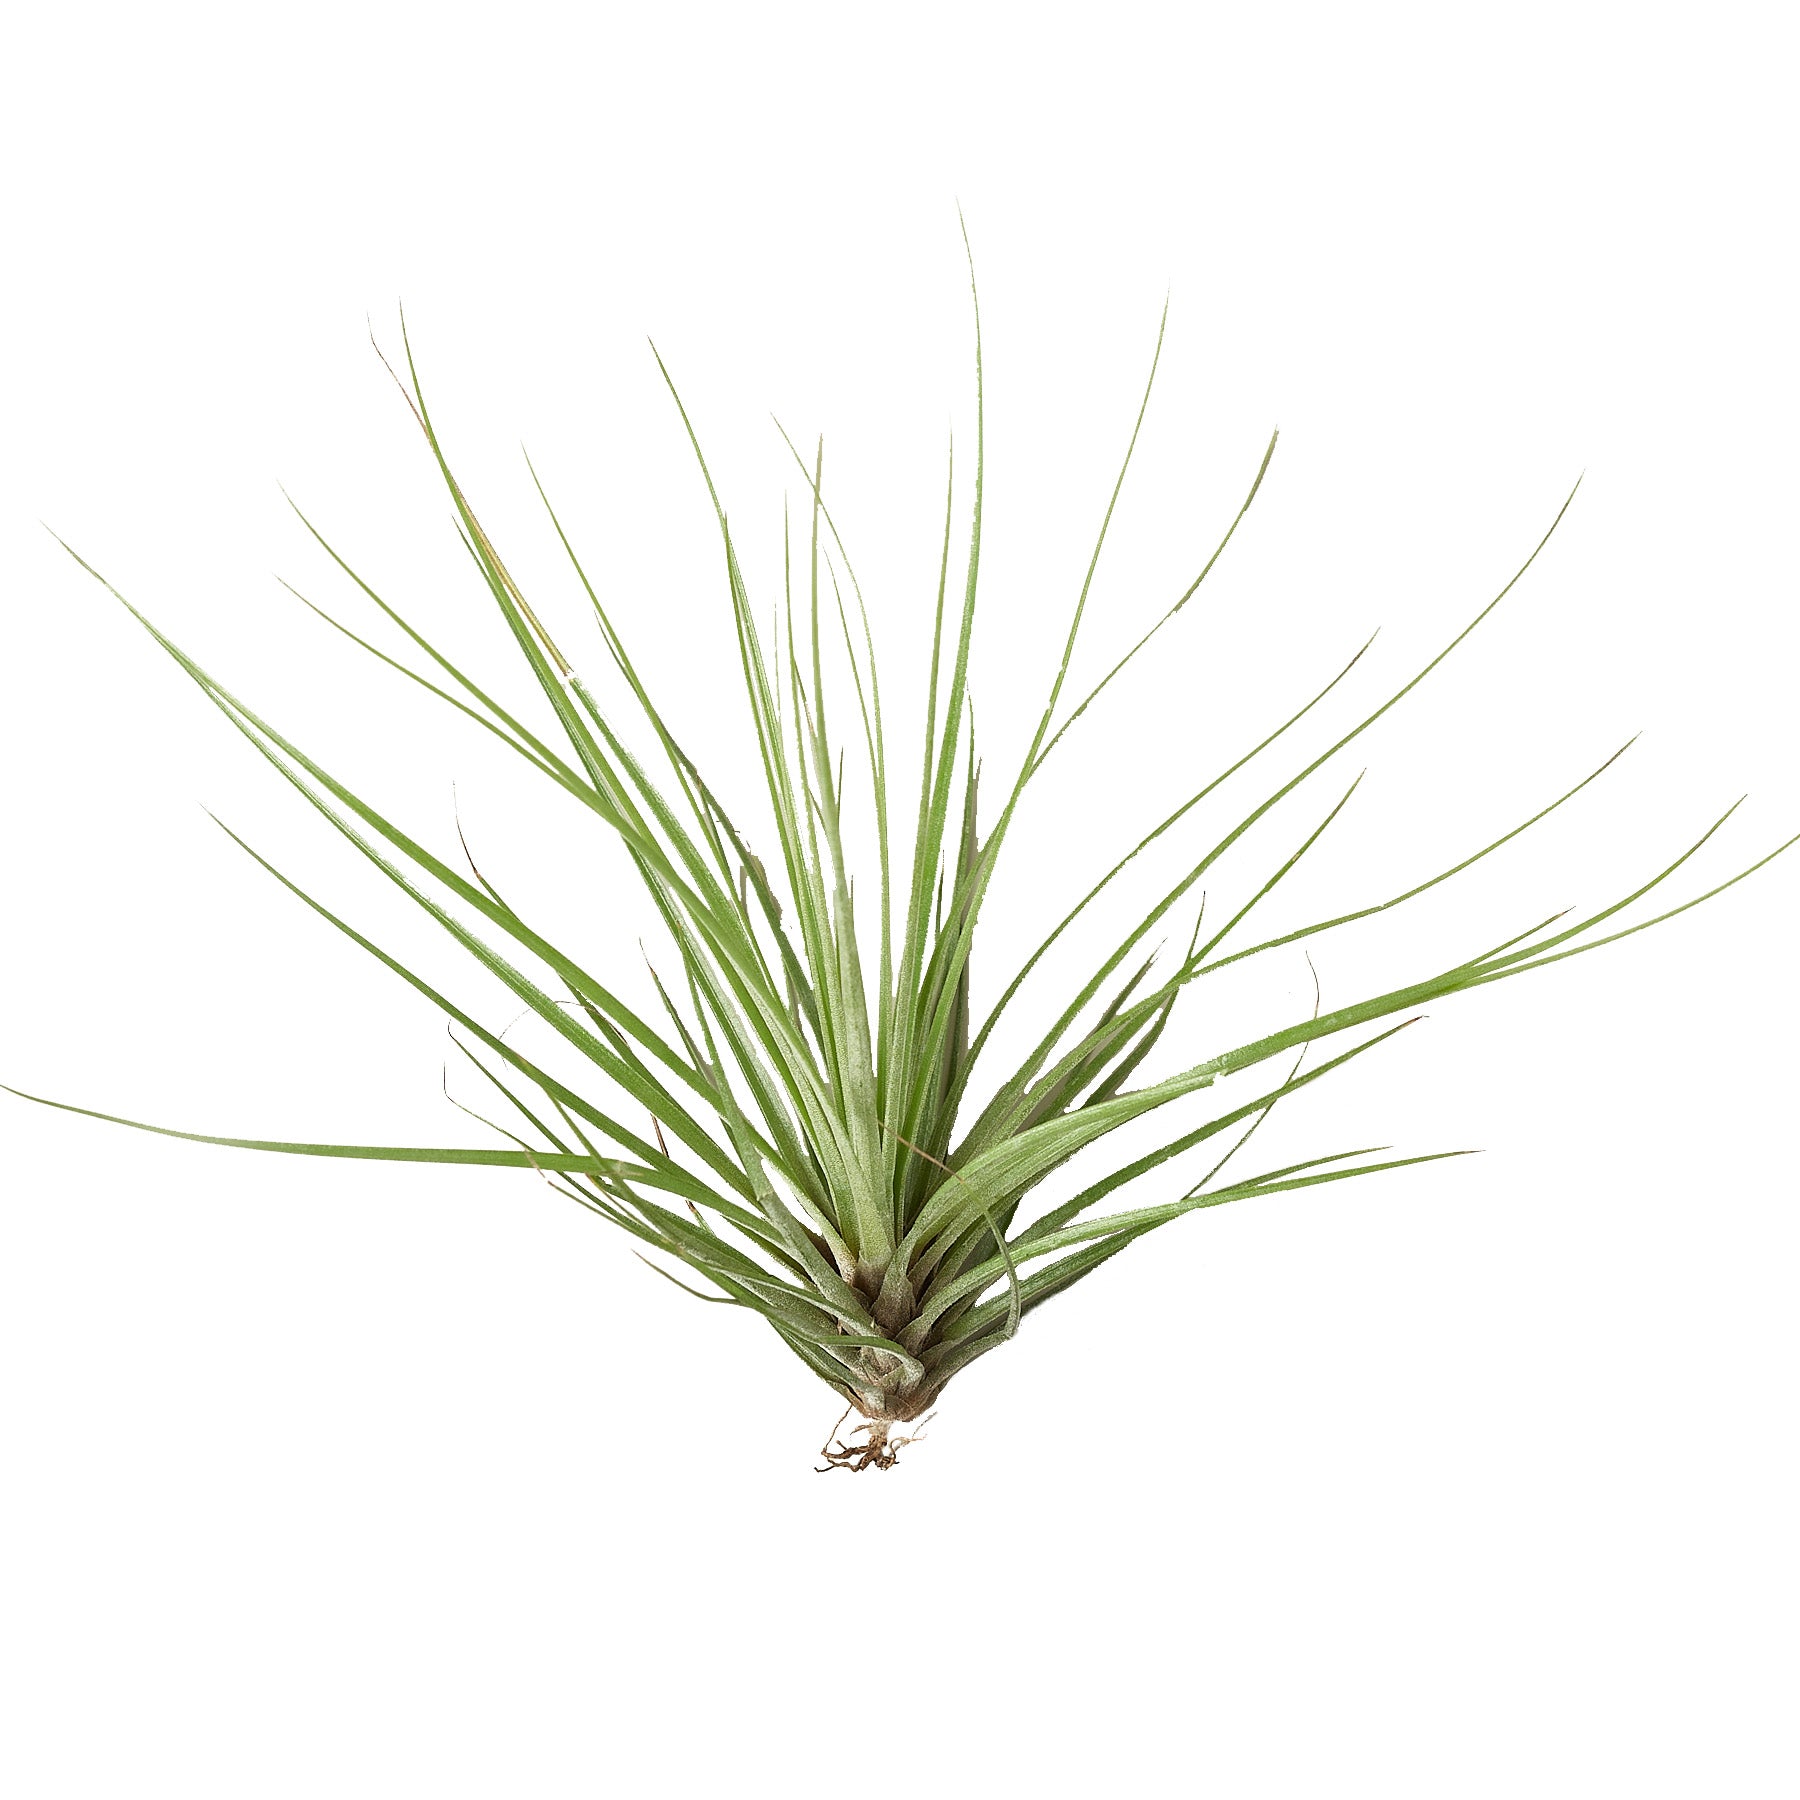 An air plant on a white background at a garden center.